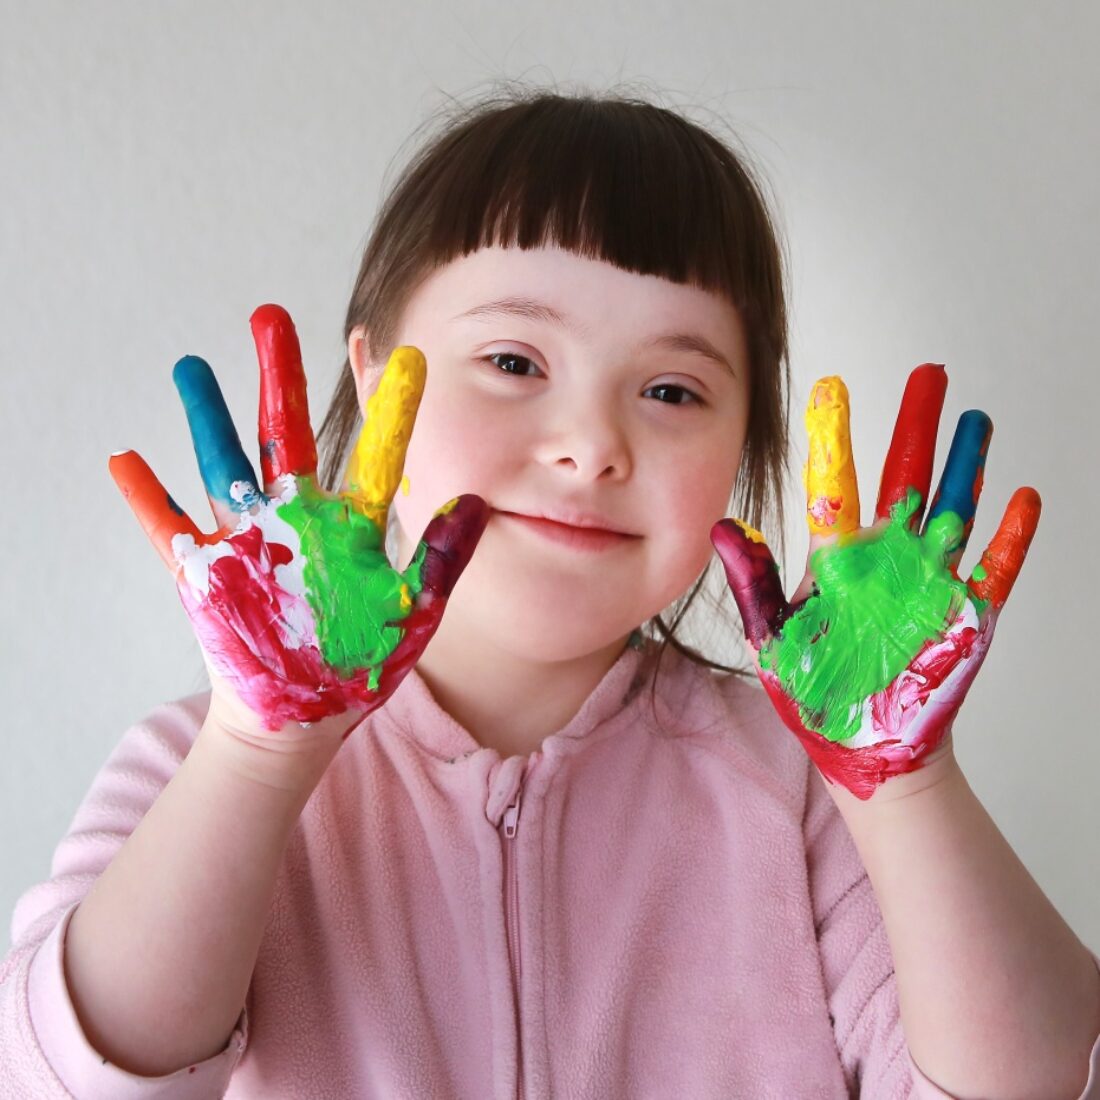 March 21 is Down Syndrome Awareness Day. Photo by Denis Kuvaev via Shutterstock.com